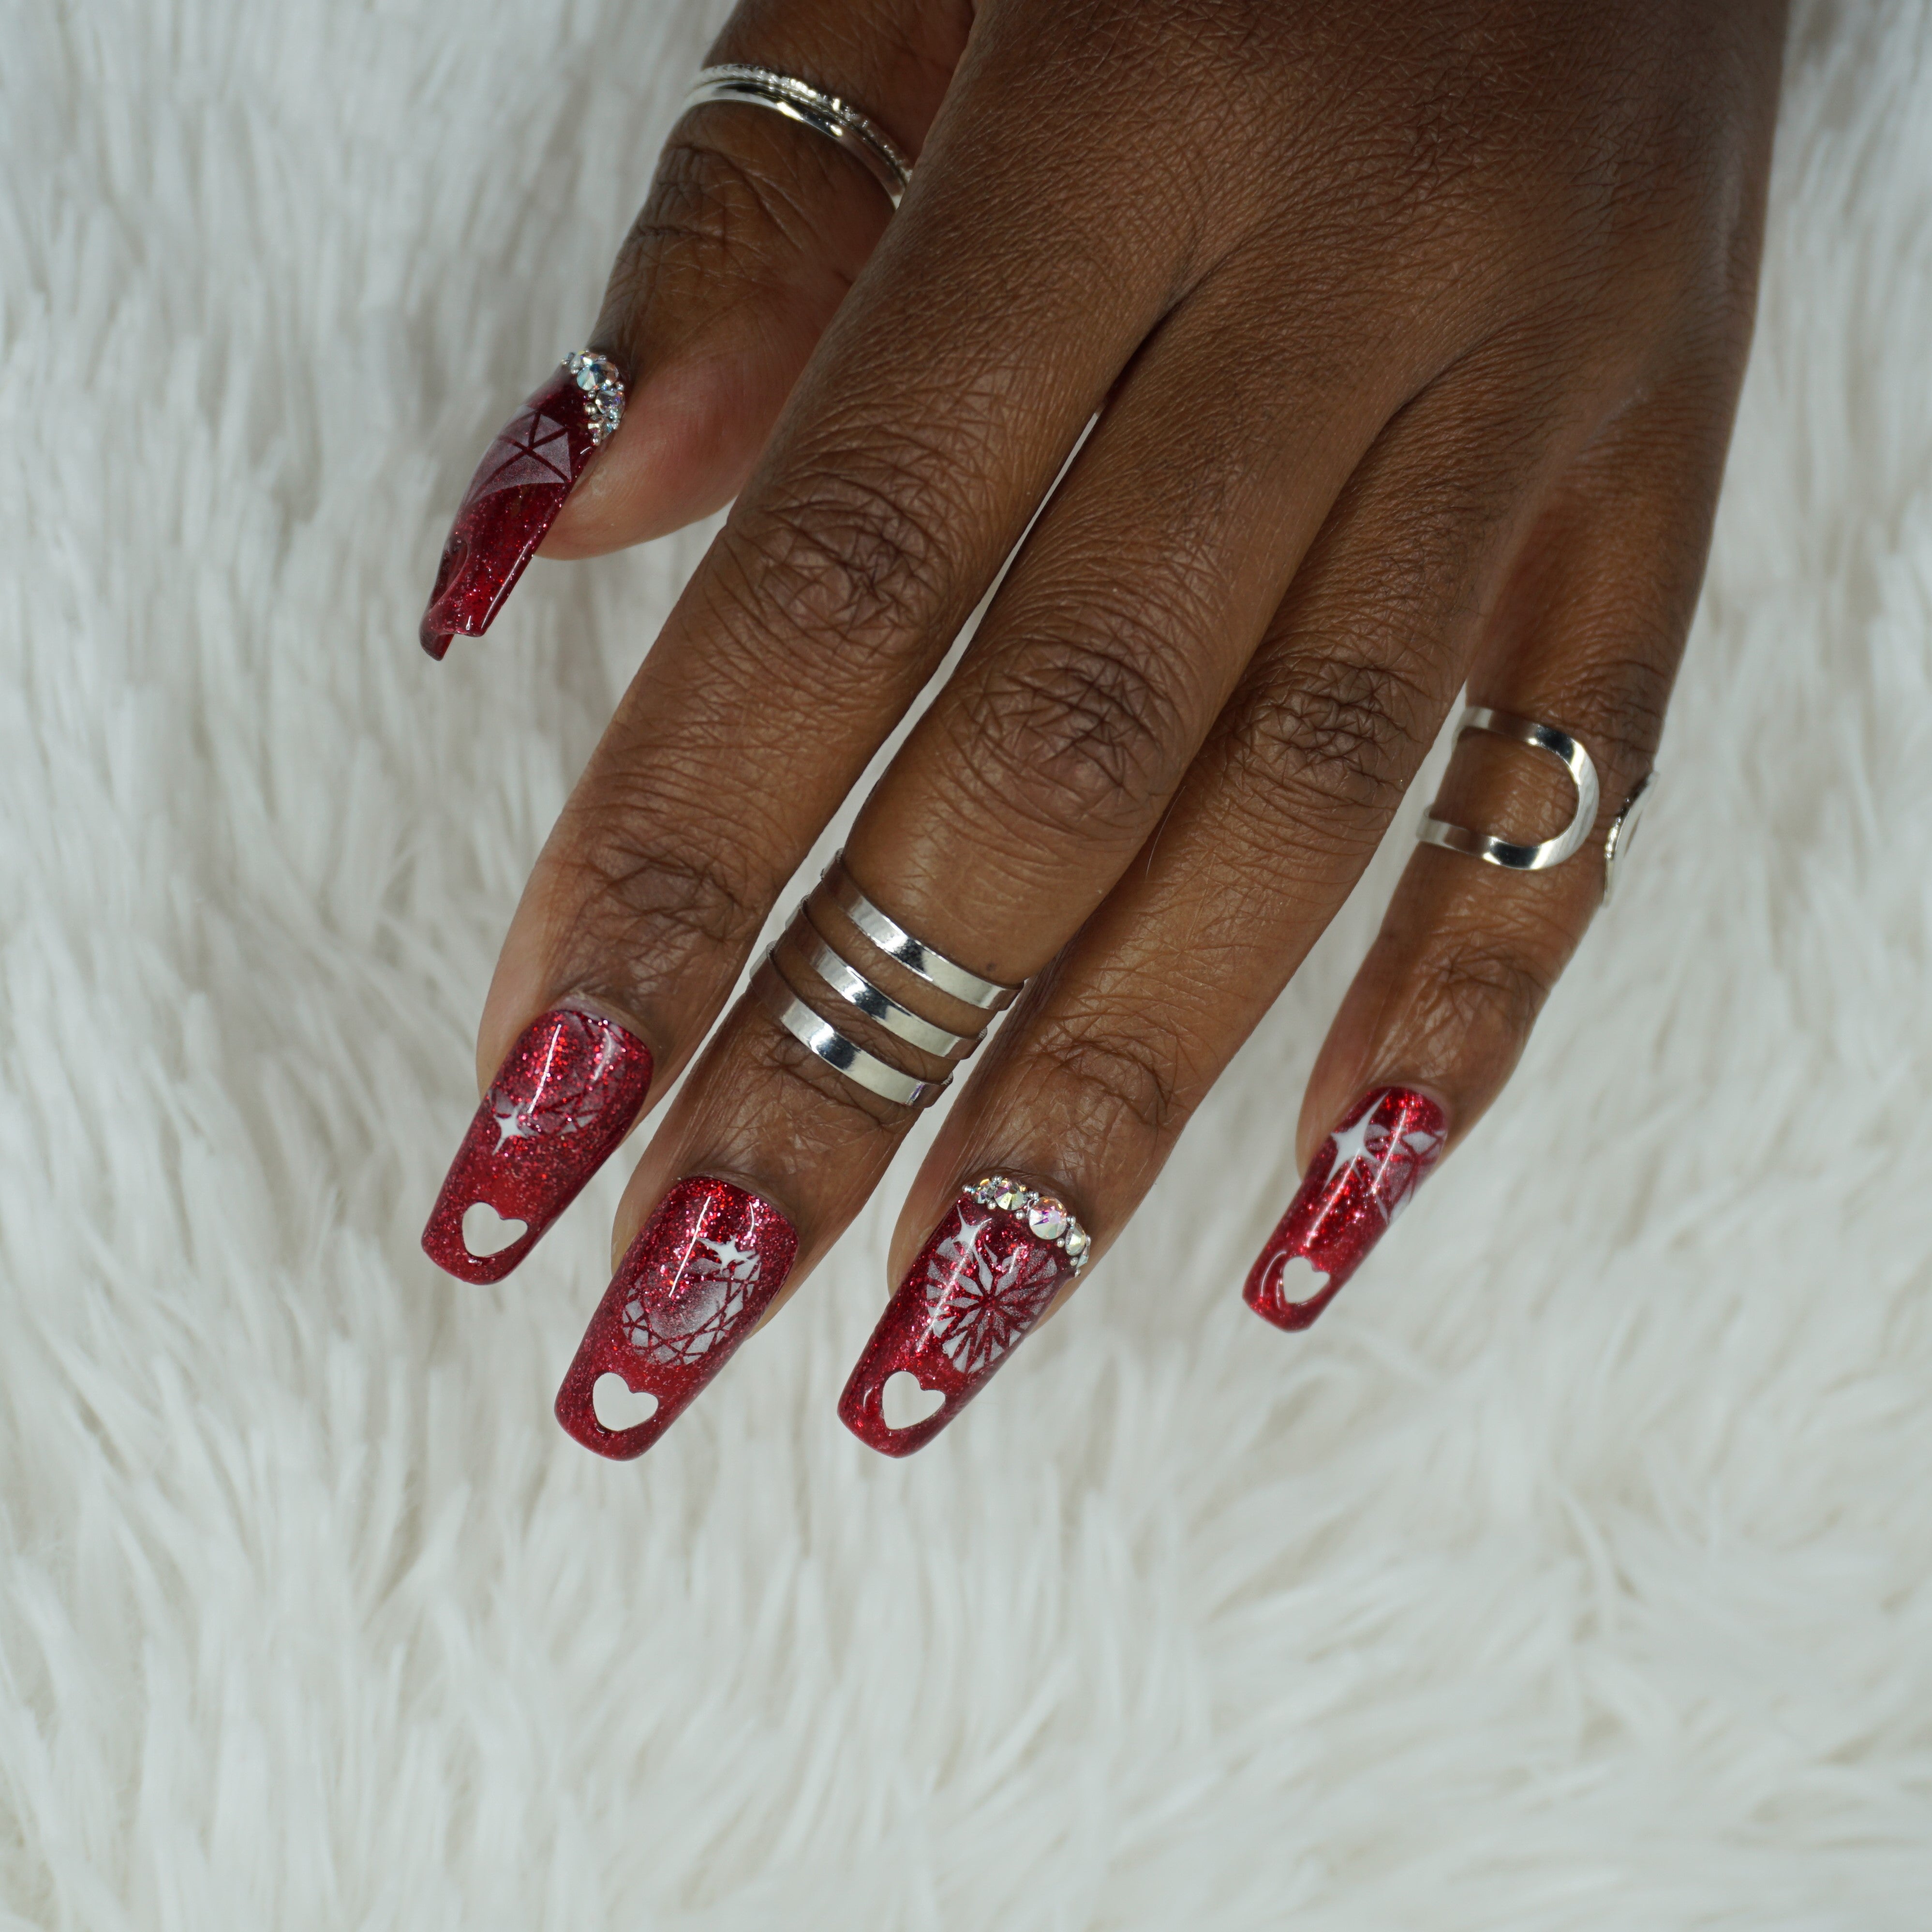 Diamond Heart Cut Out Nails Glam Goodies